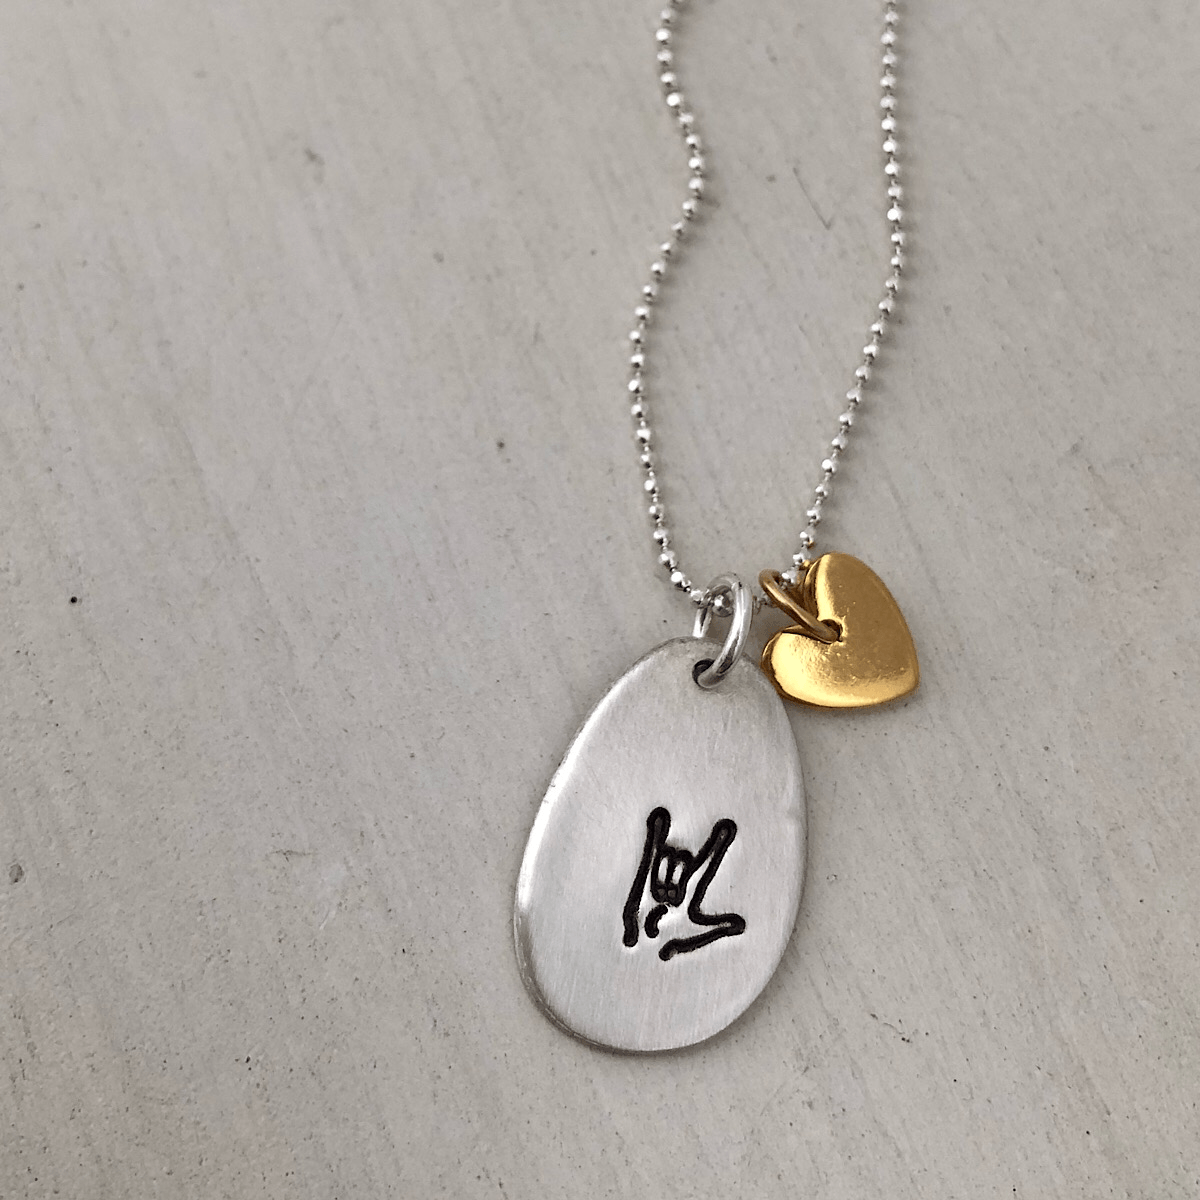 I Love You Pebble Necklace - IsabelleGraceJewelry